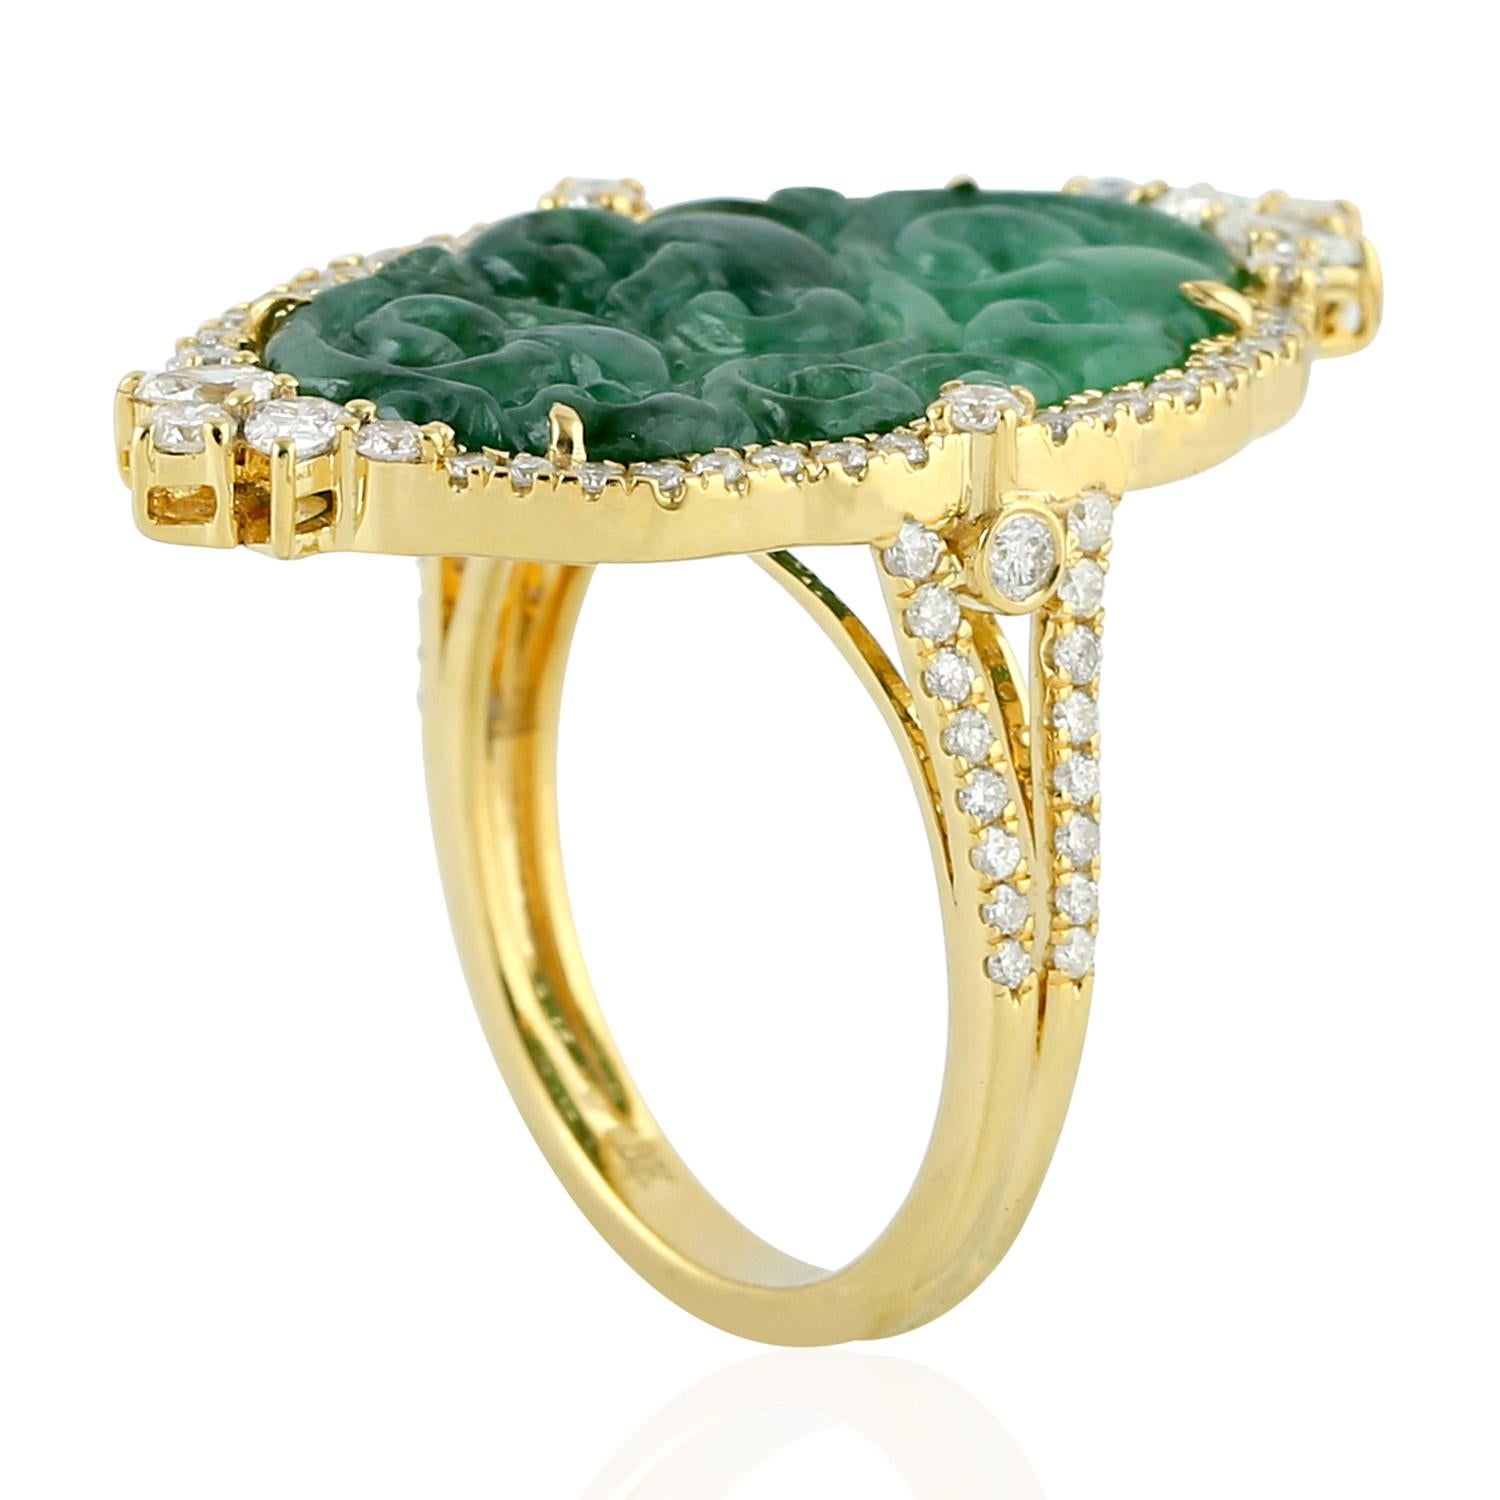 Mixed Cut Oval Shaped Carved Jade Ring With Diamonds Made In 18k Yellow Gold  For Sale